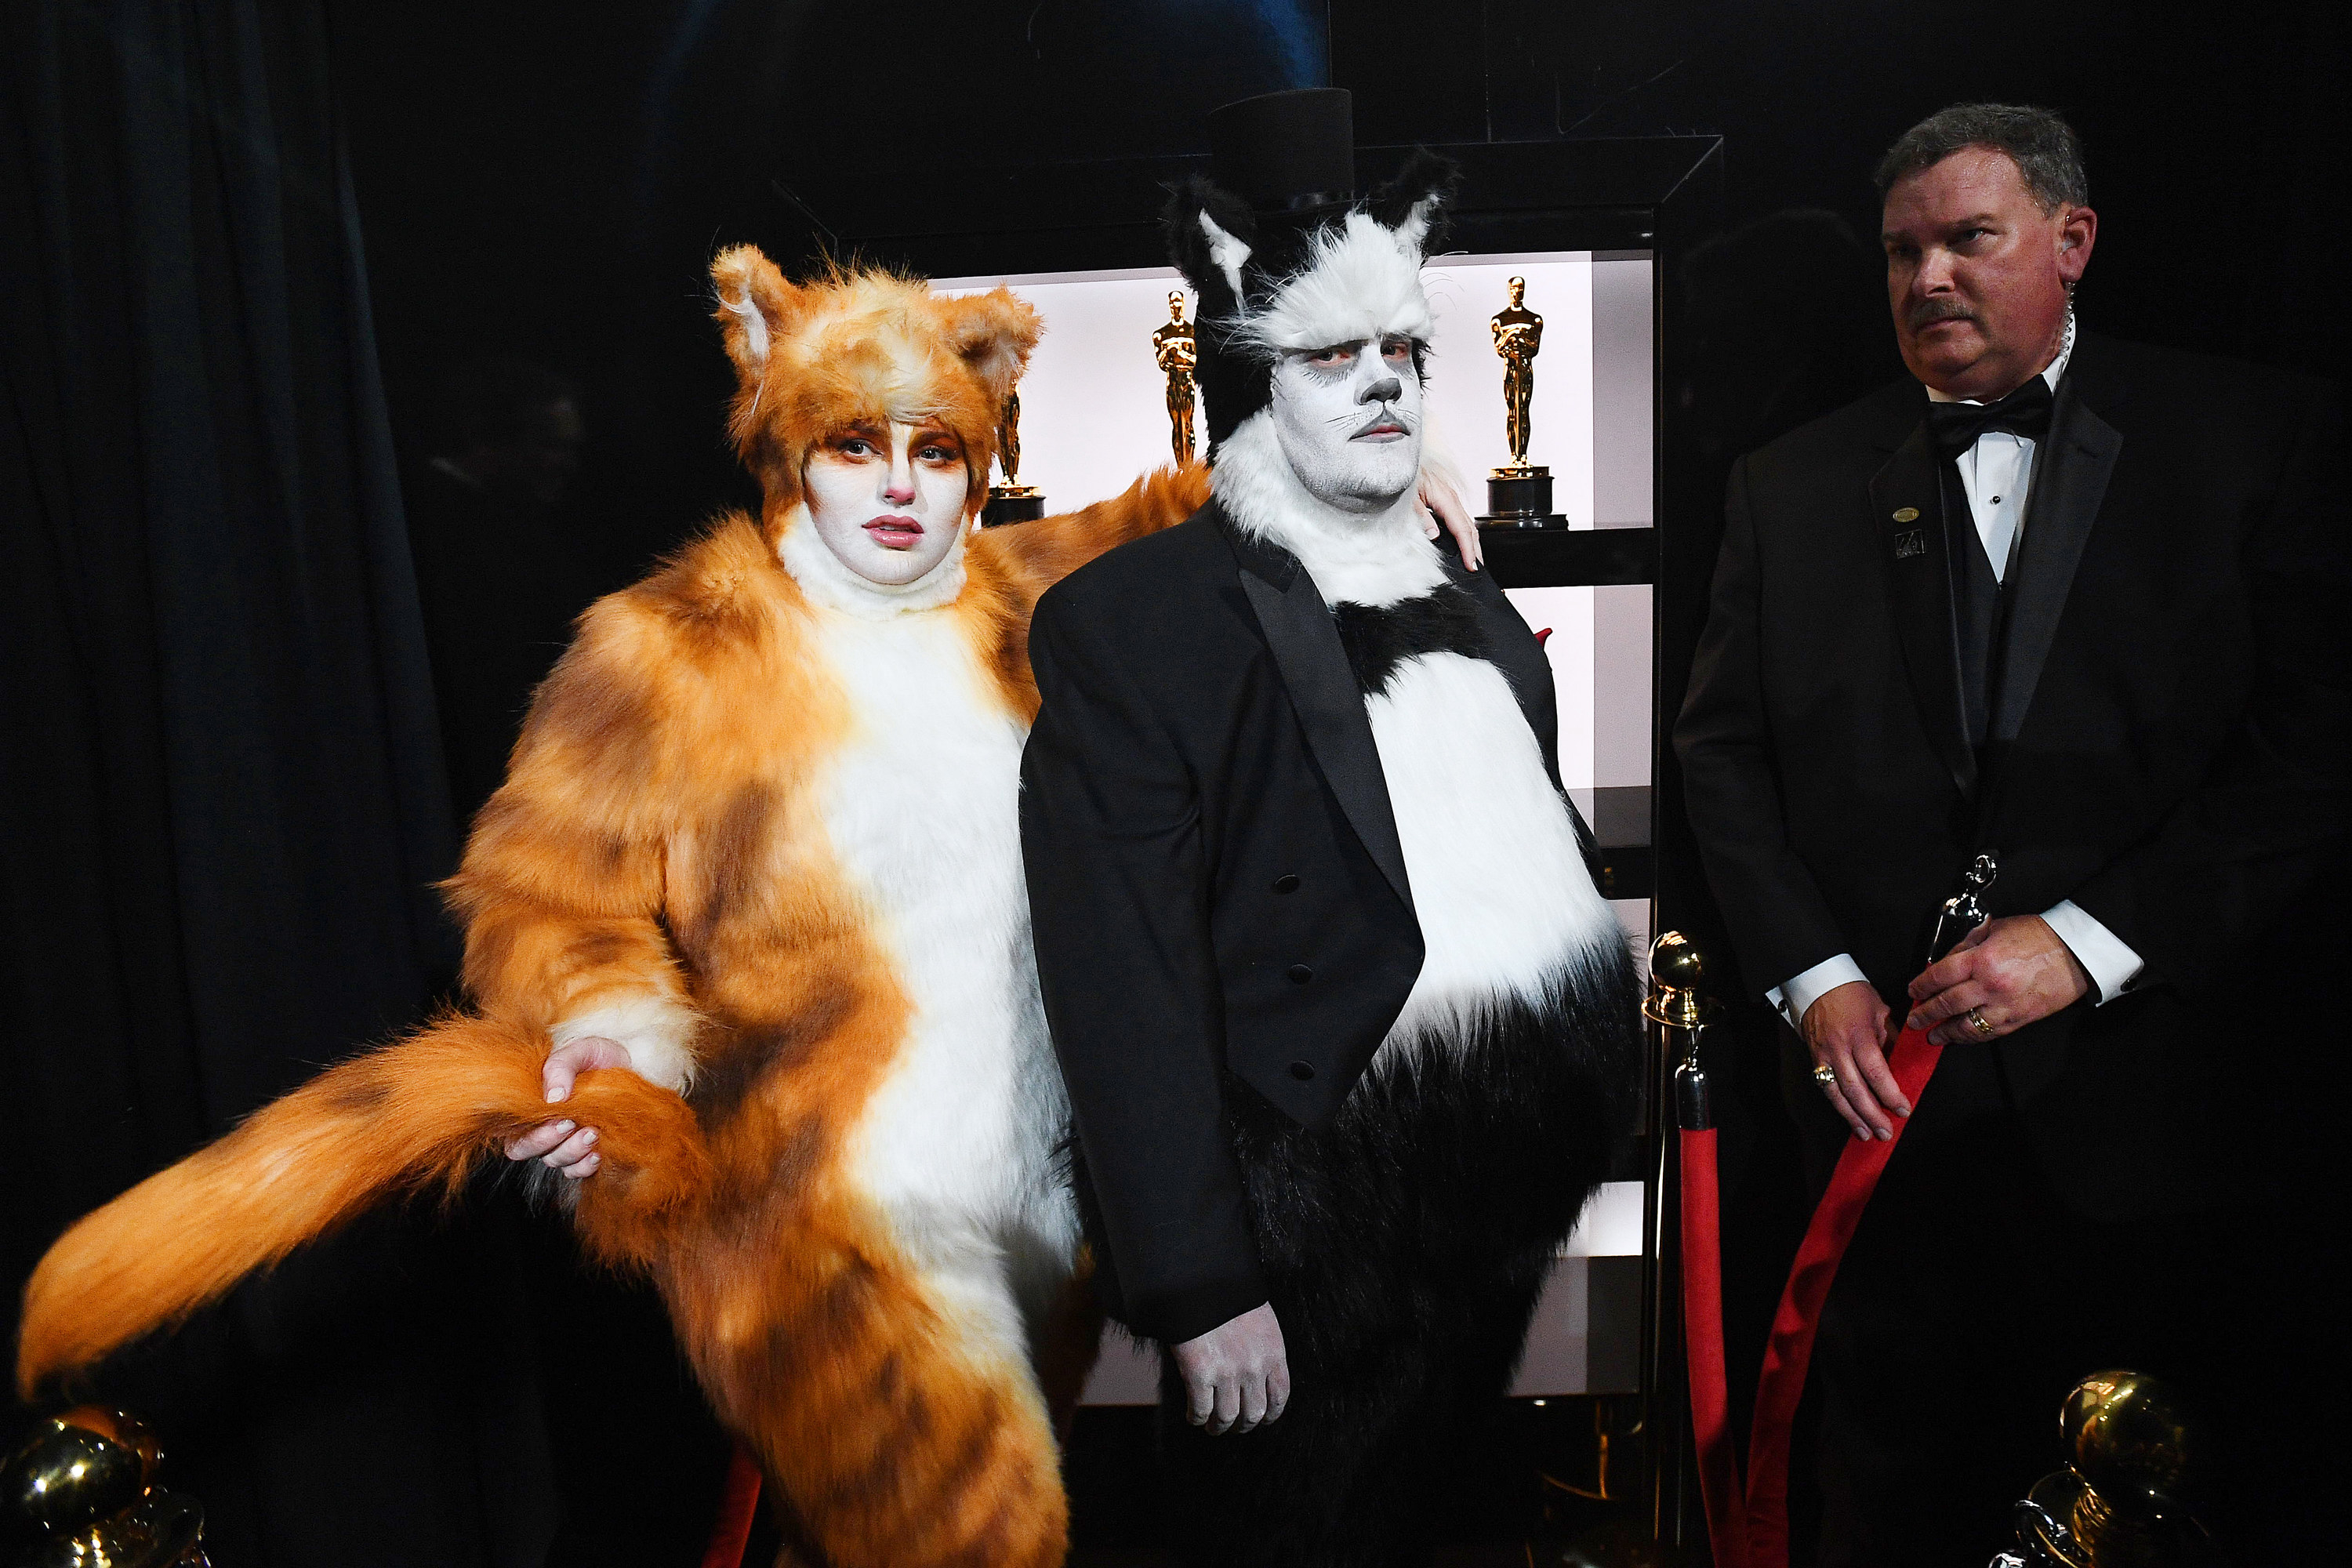 Two people dressed as cats from the film at the Oscars